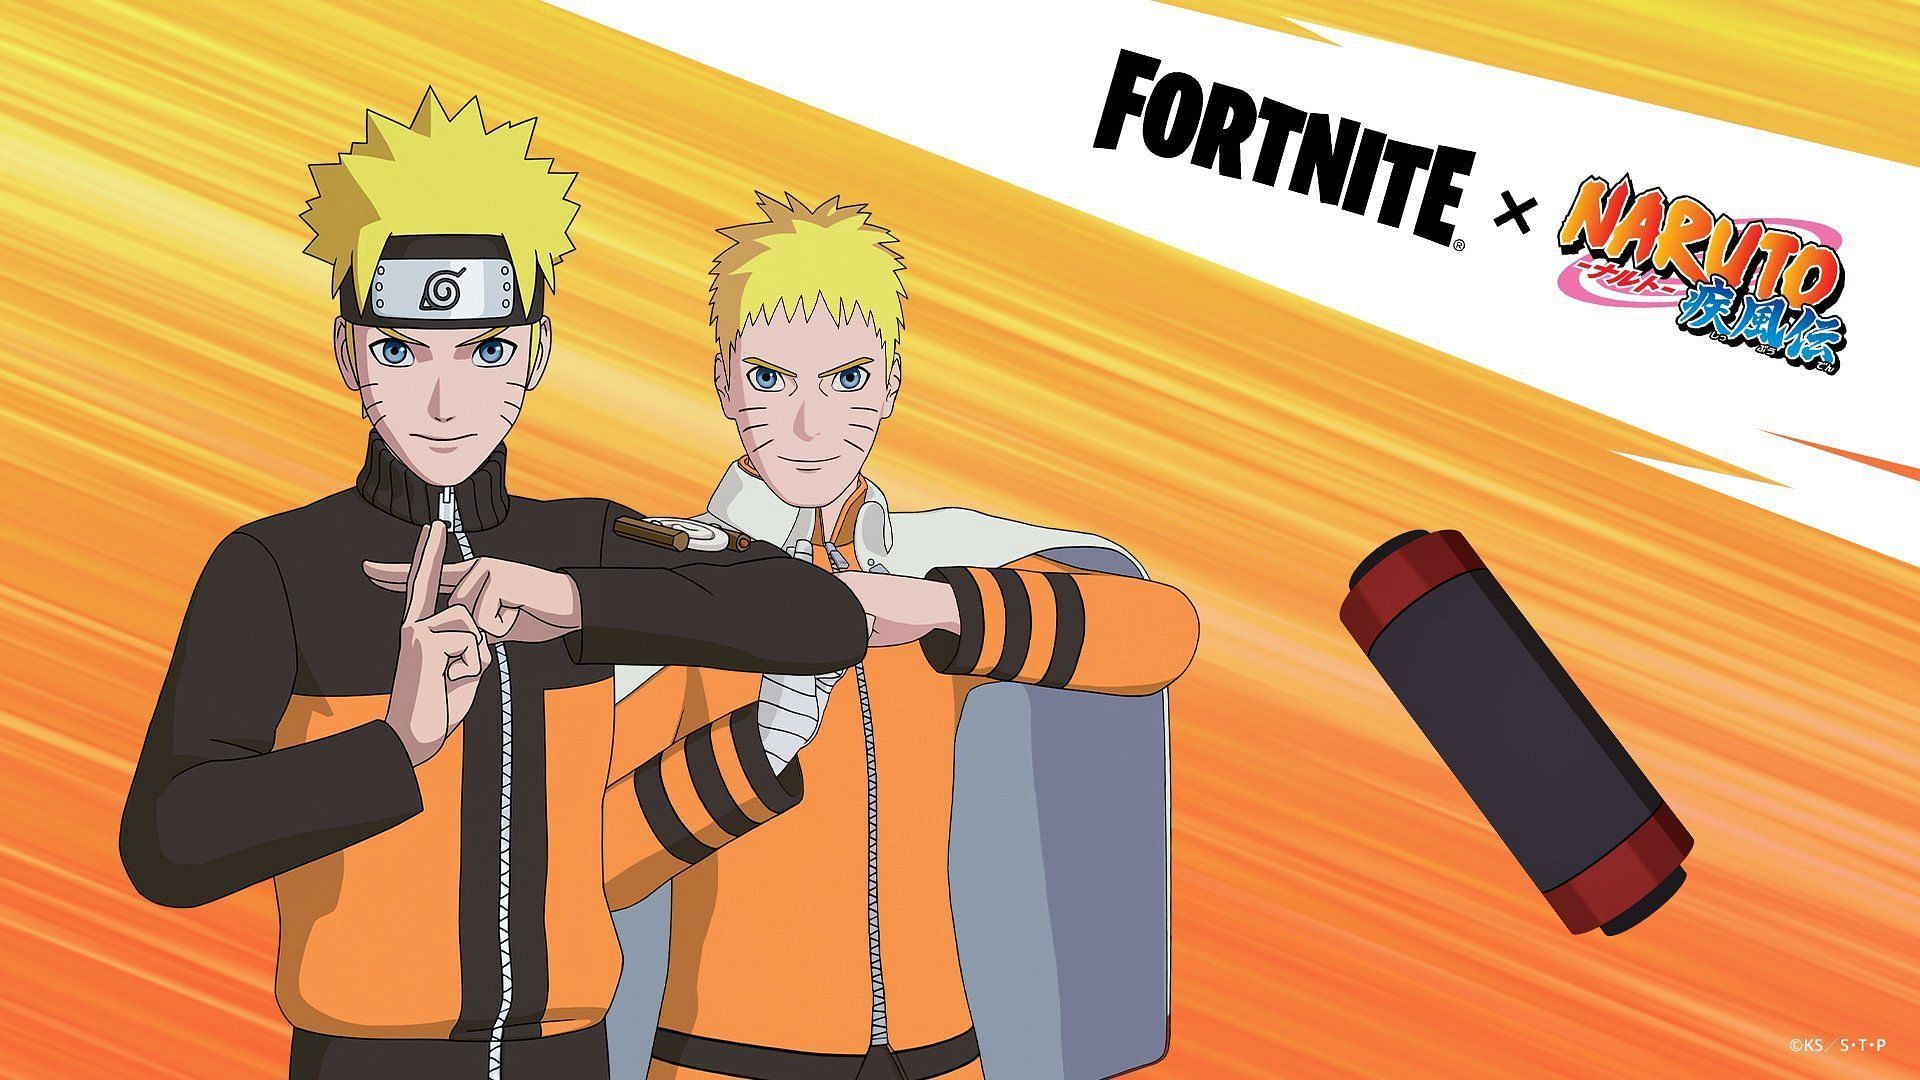 The Naruto crossover in Fortnite is already seeing great success in many of the fans (Image via Epic Games)